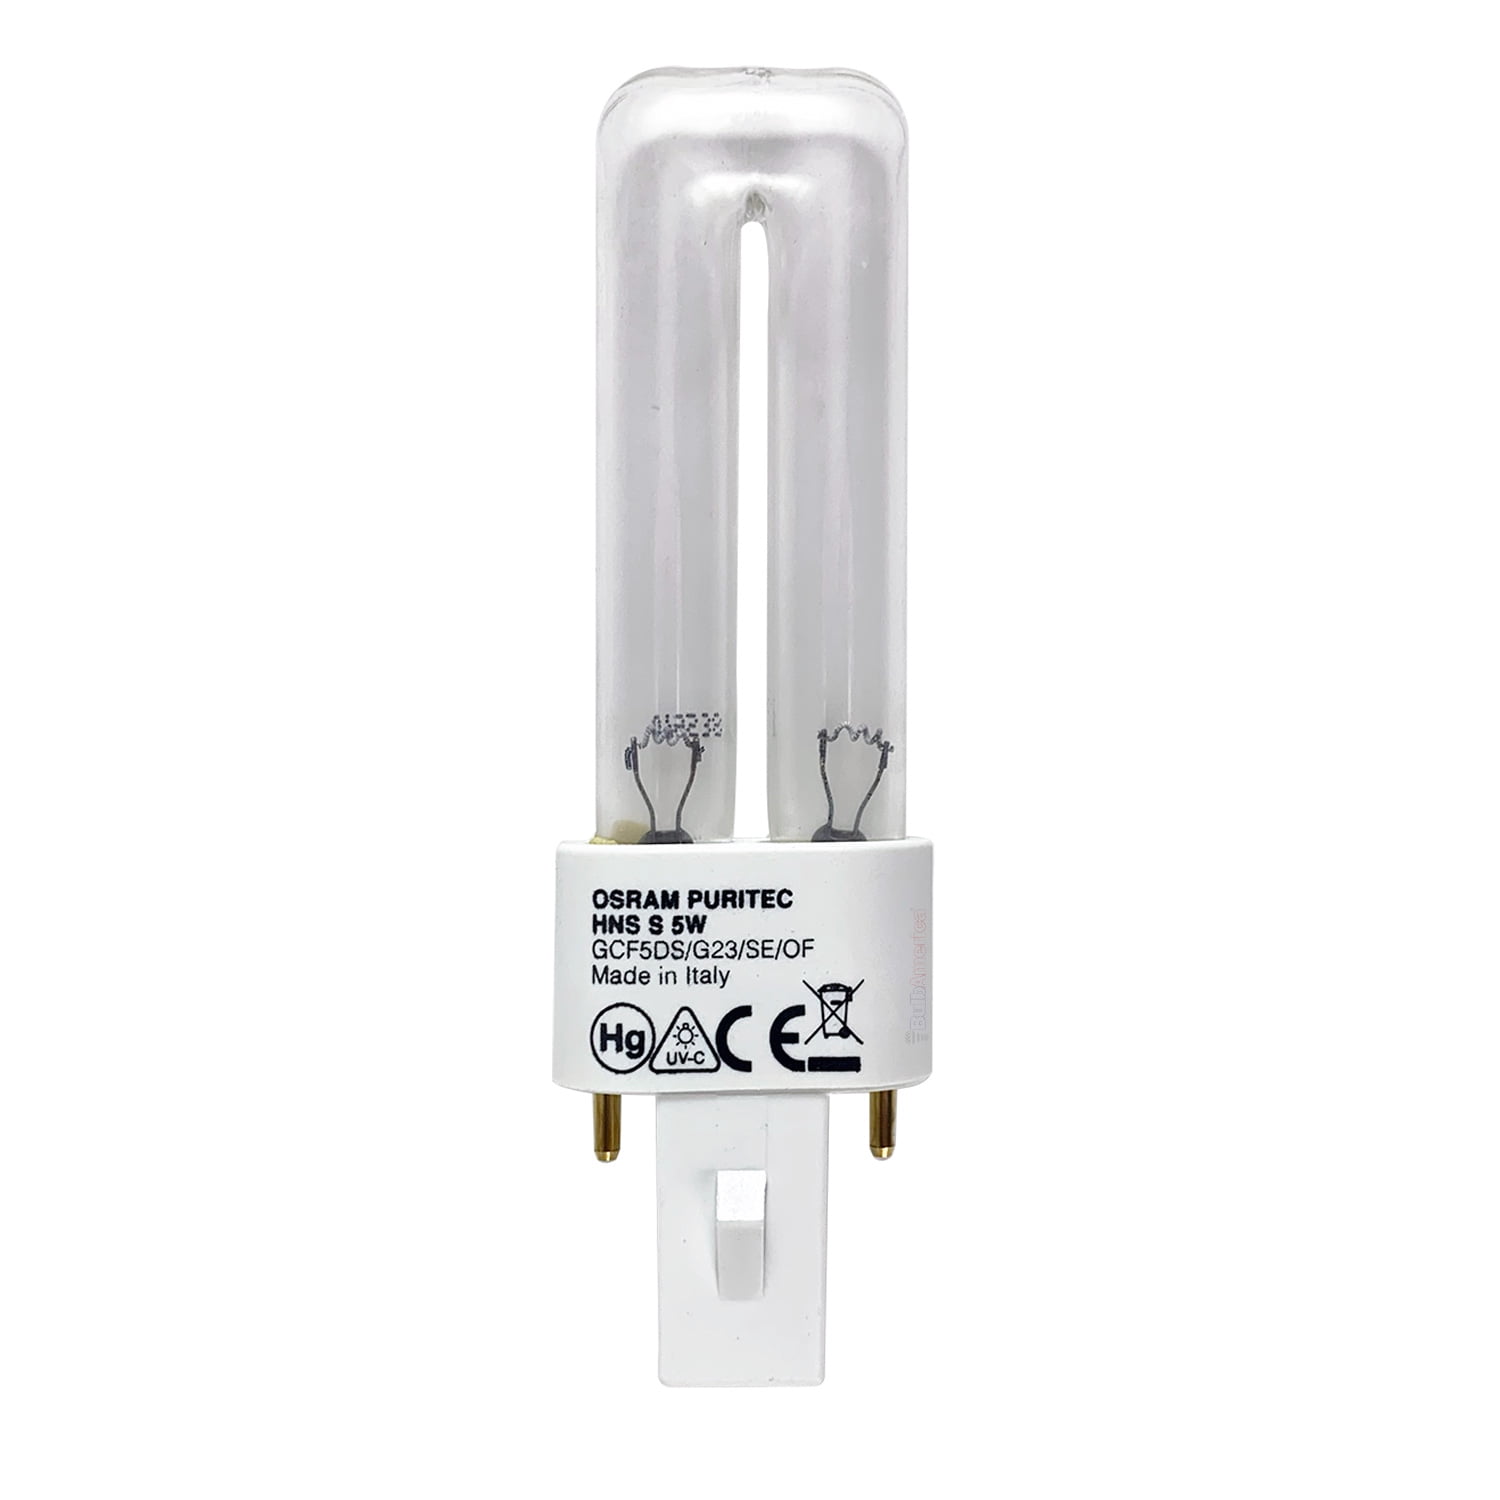 REPLACEMENT BULB FOR CORALIFE 53700 150W 